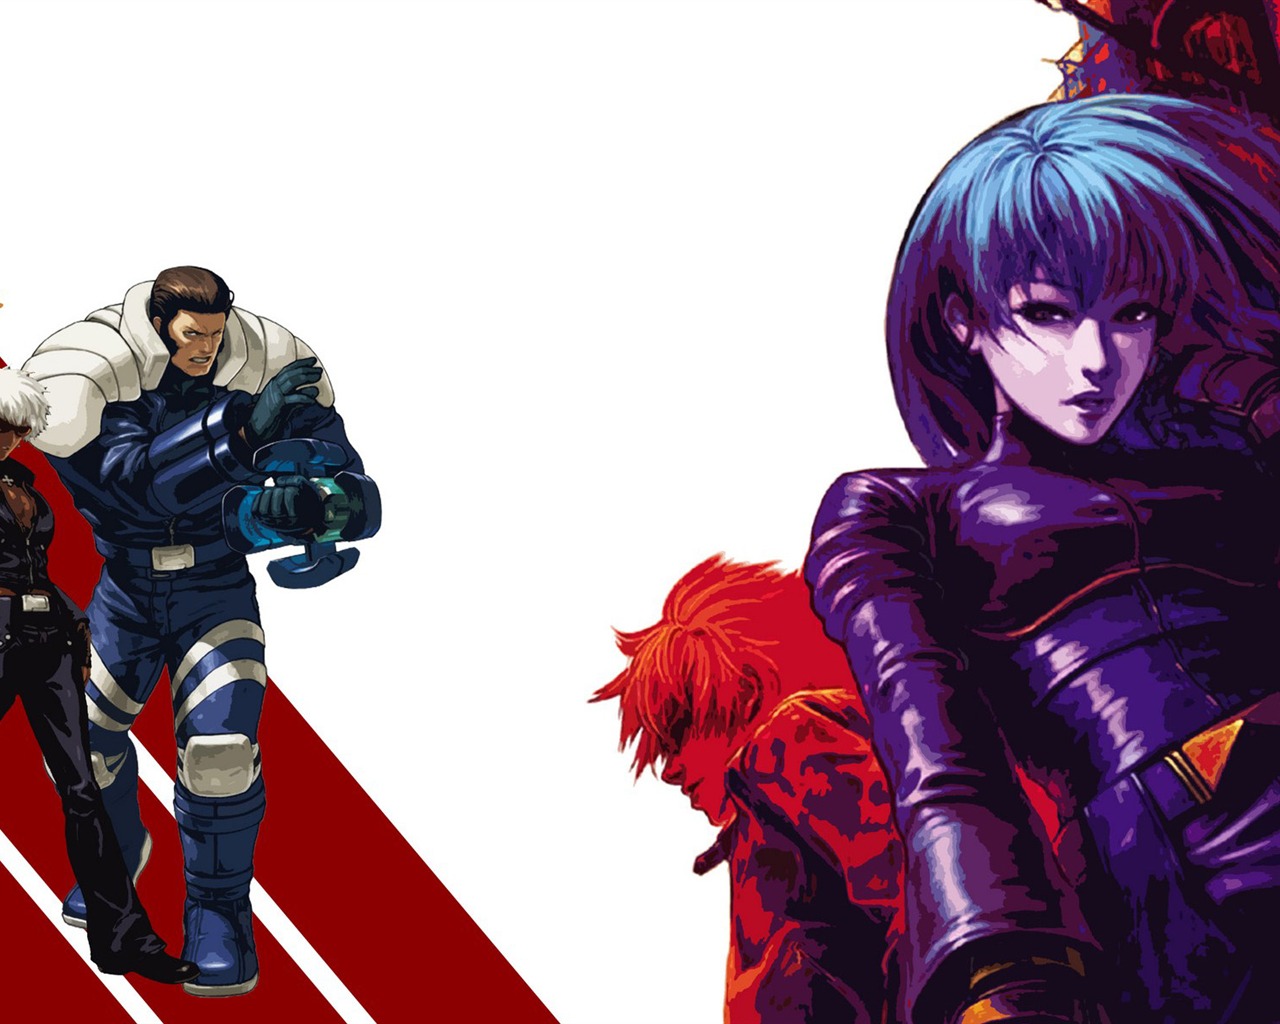 The King of Fighters XIII wallpapers #5 - 1280x1024